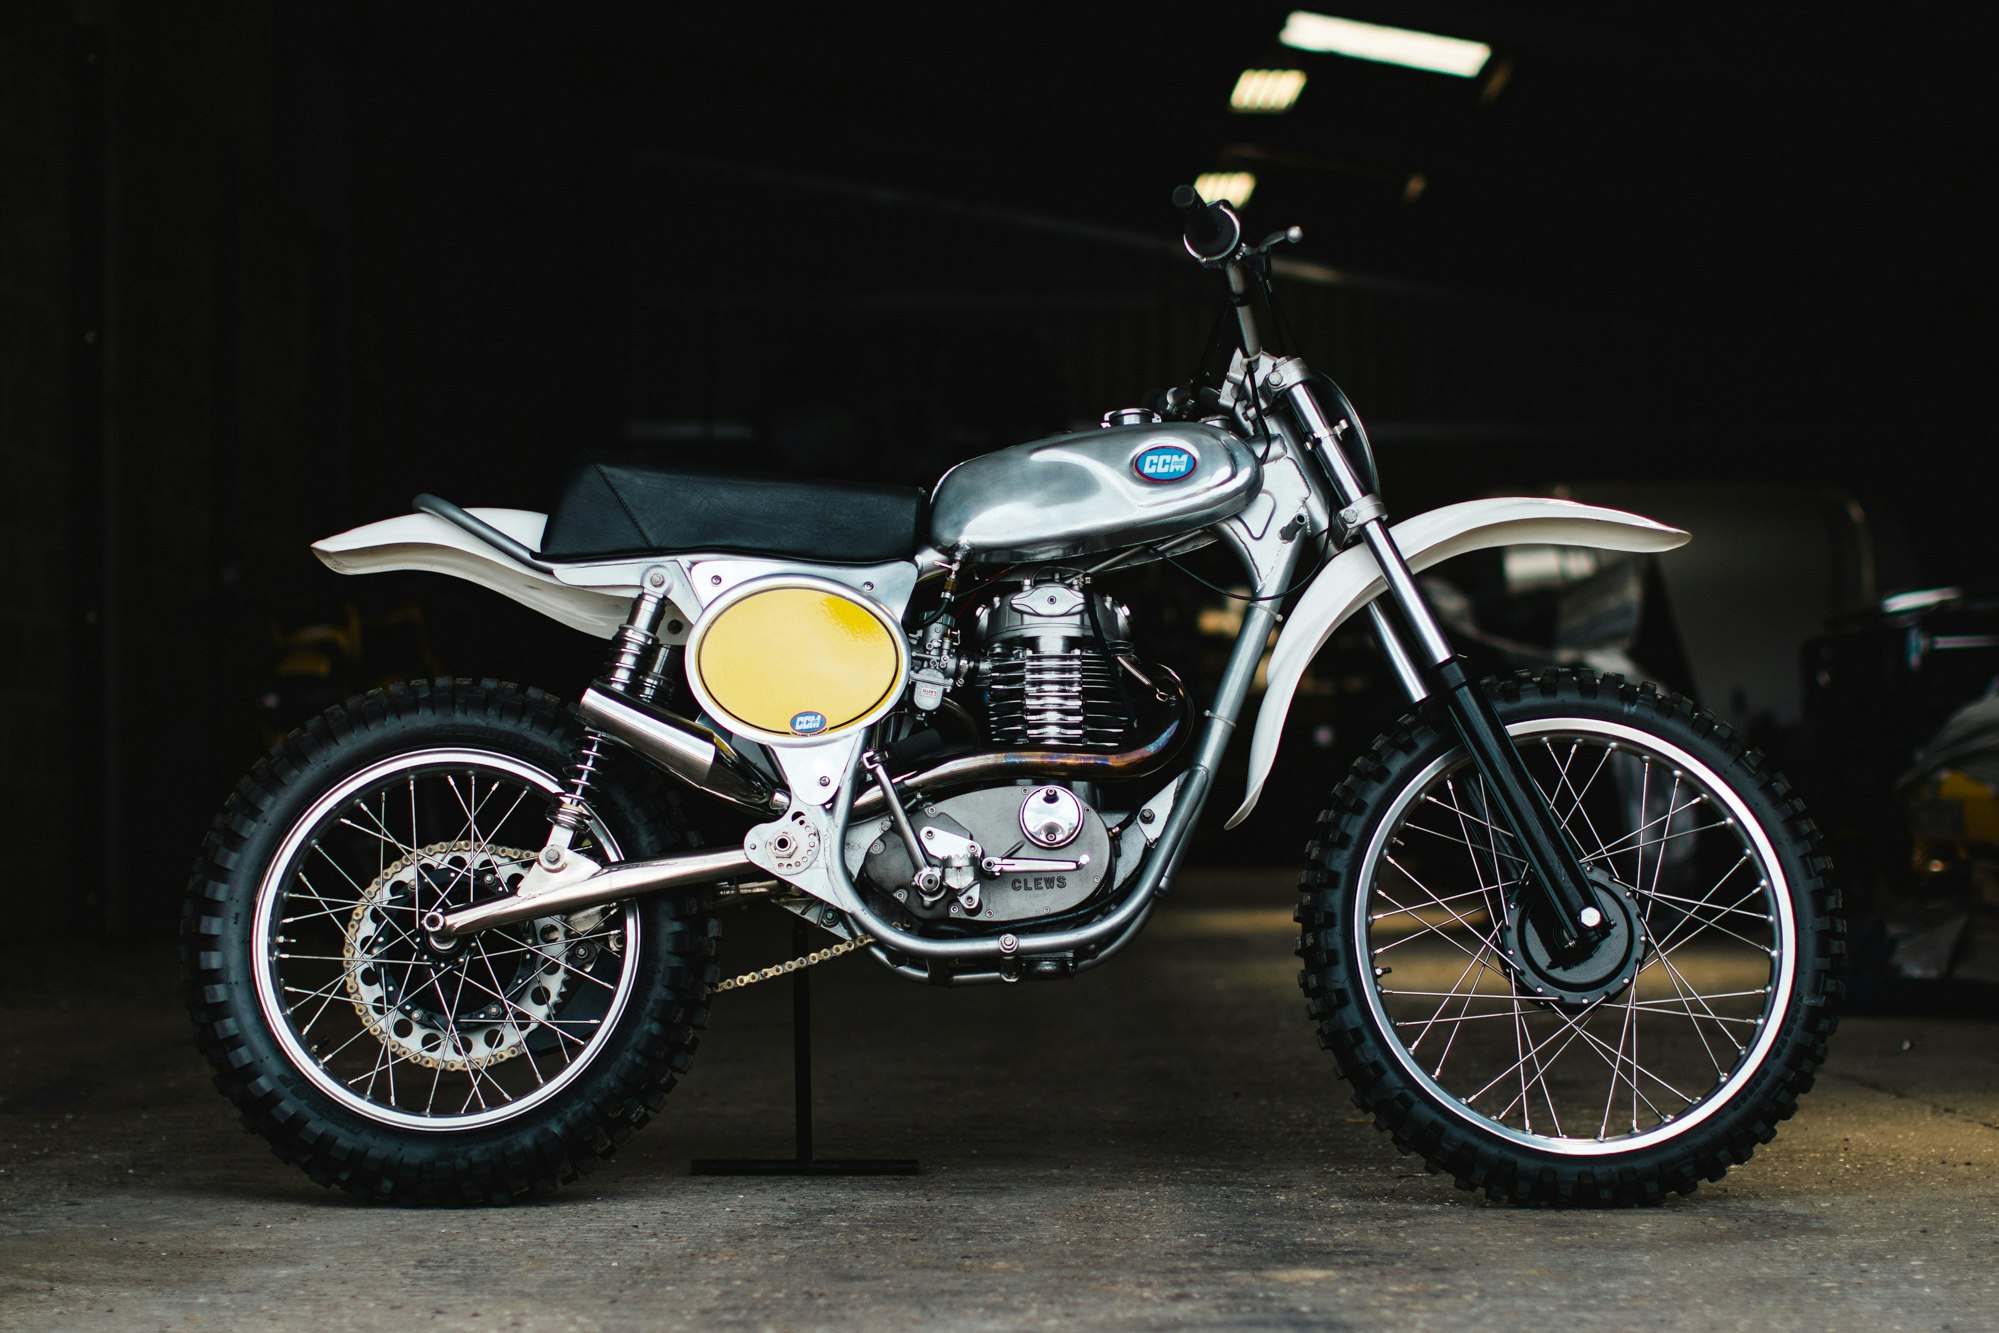 1974 CCM 540 for sale by auction in Daventry, Northamptonshire, United Kingdom